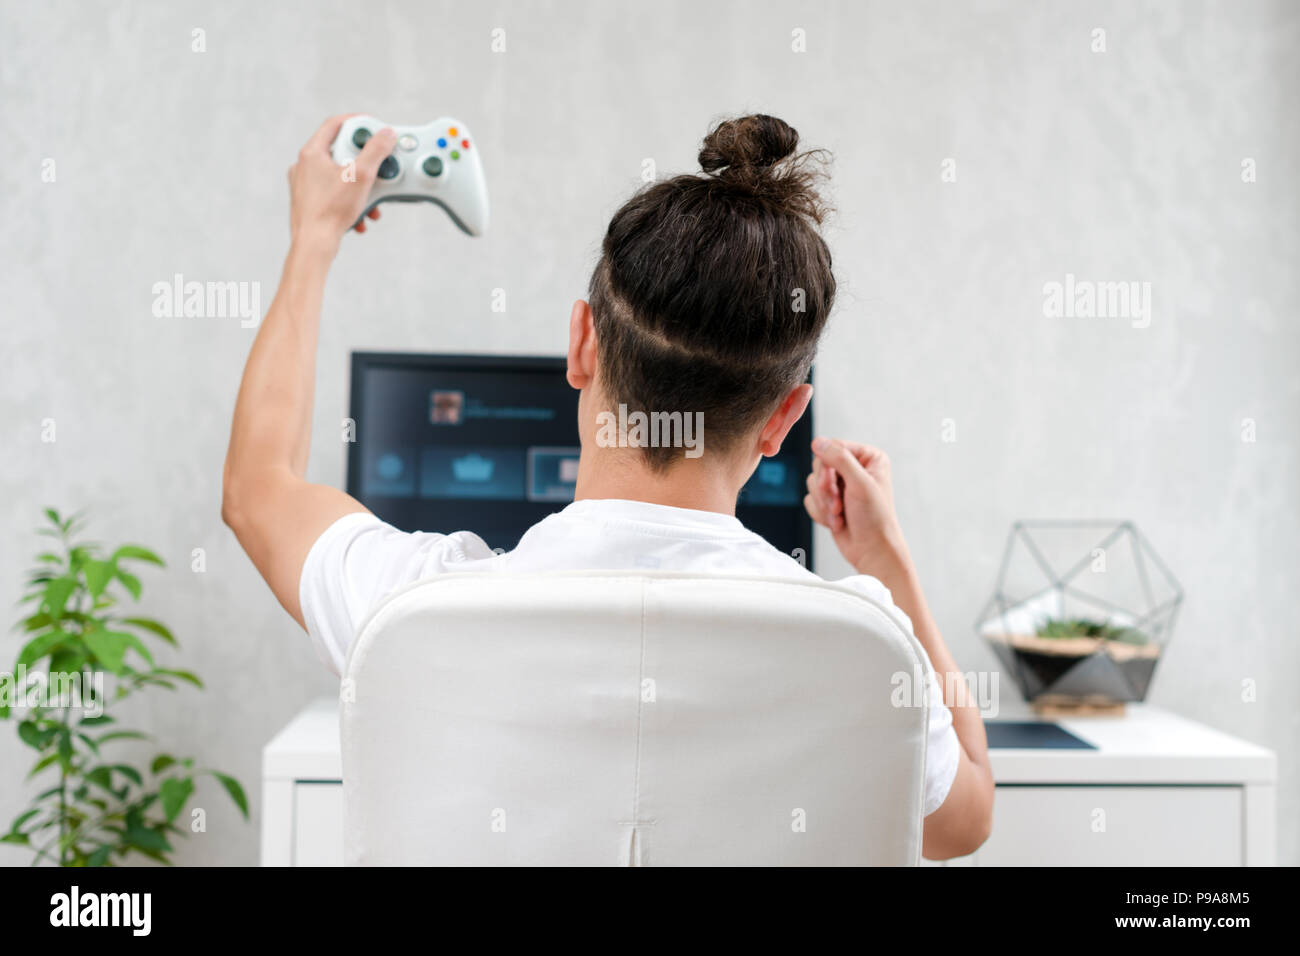 Happy young man playing and winning online game on computer. Back view of  gamer with video console gamepad controller. Competitive gaming, electronic  sports, technology, gaming, entertainment concept., Stock image